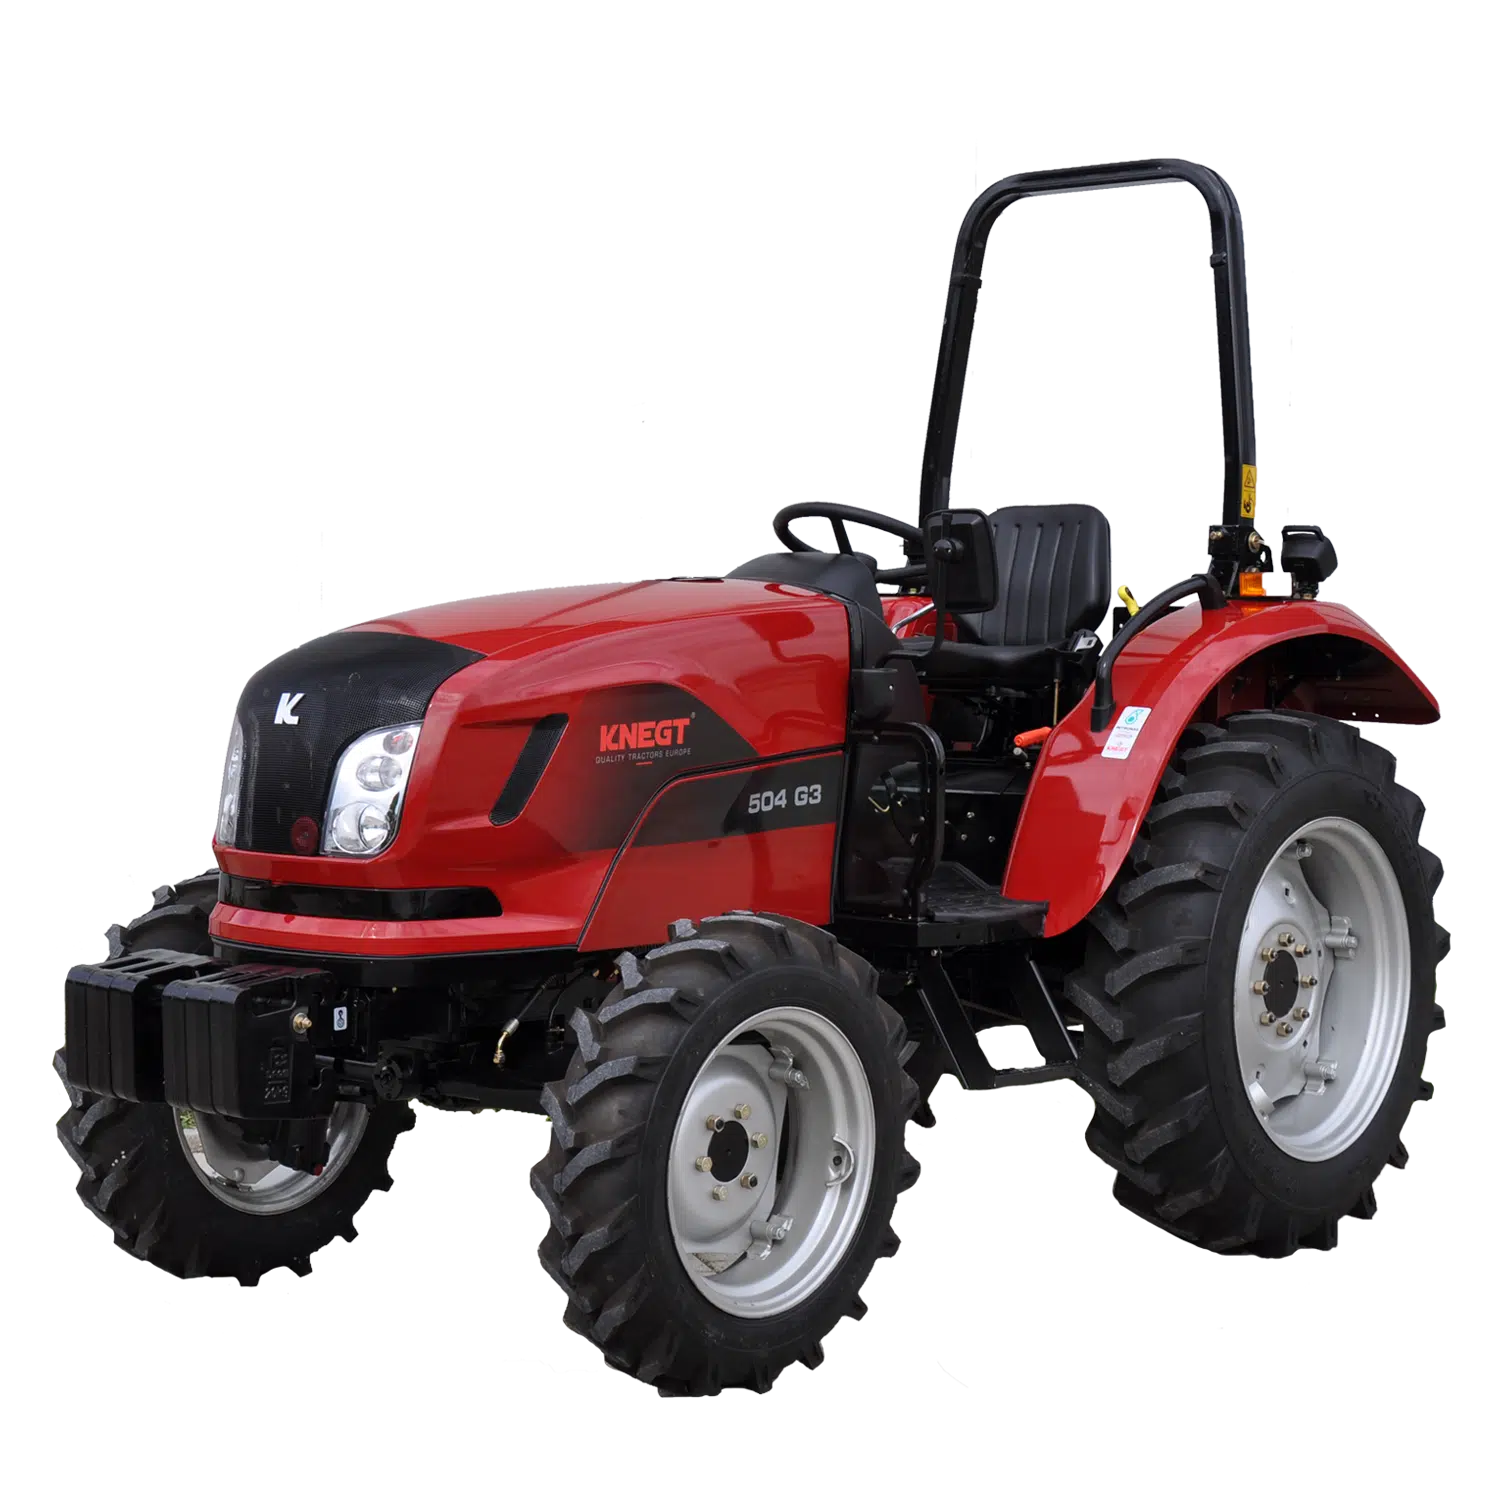 knegt_compact_tractor_504g3_productfoto